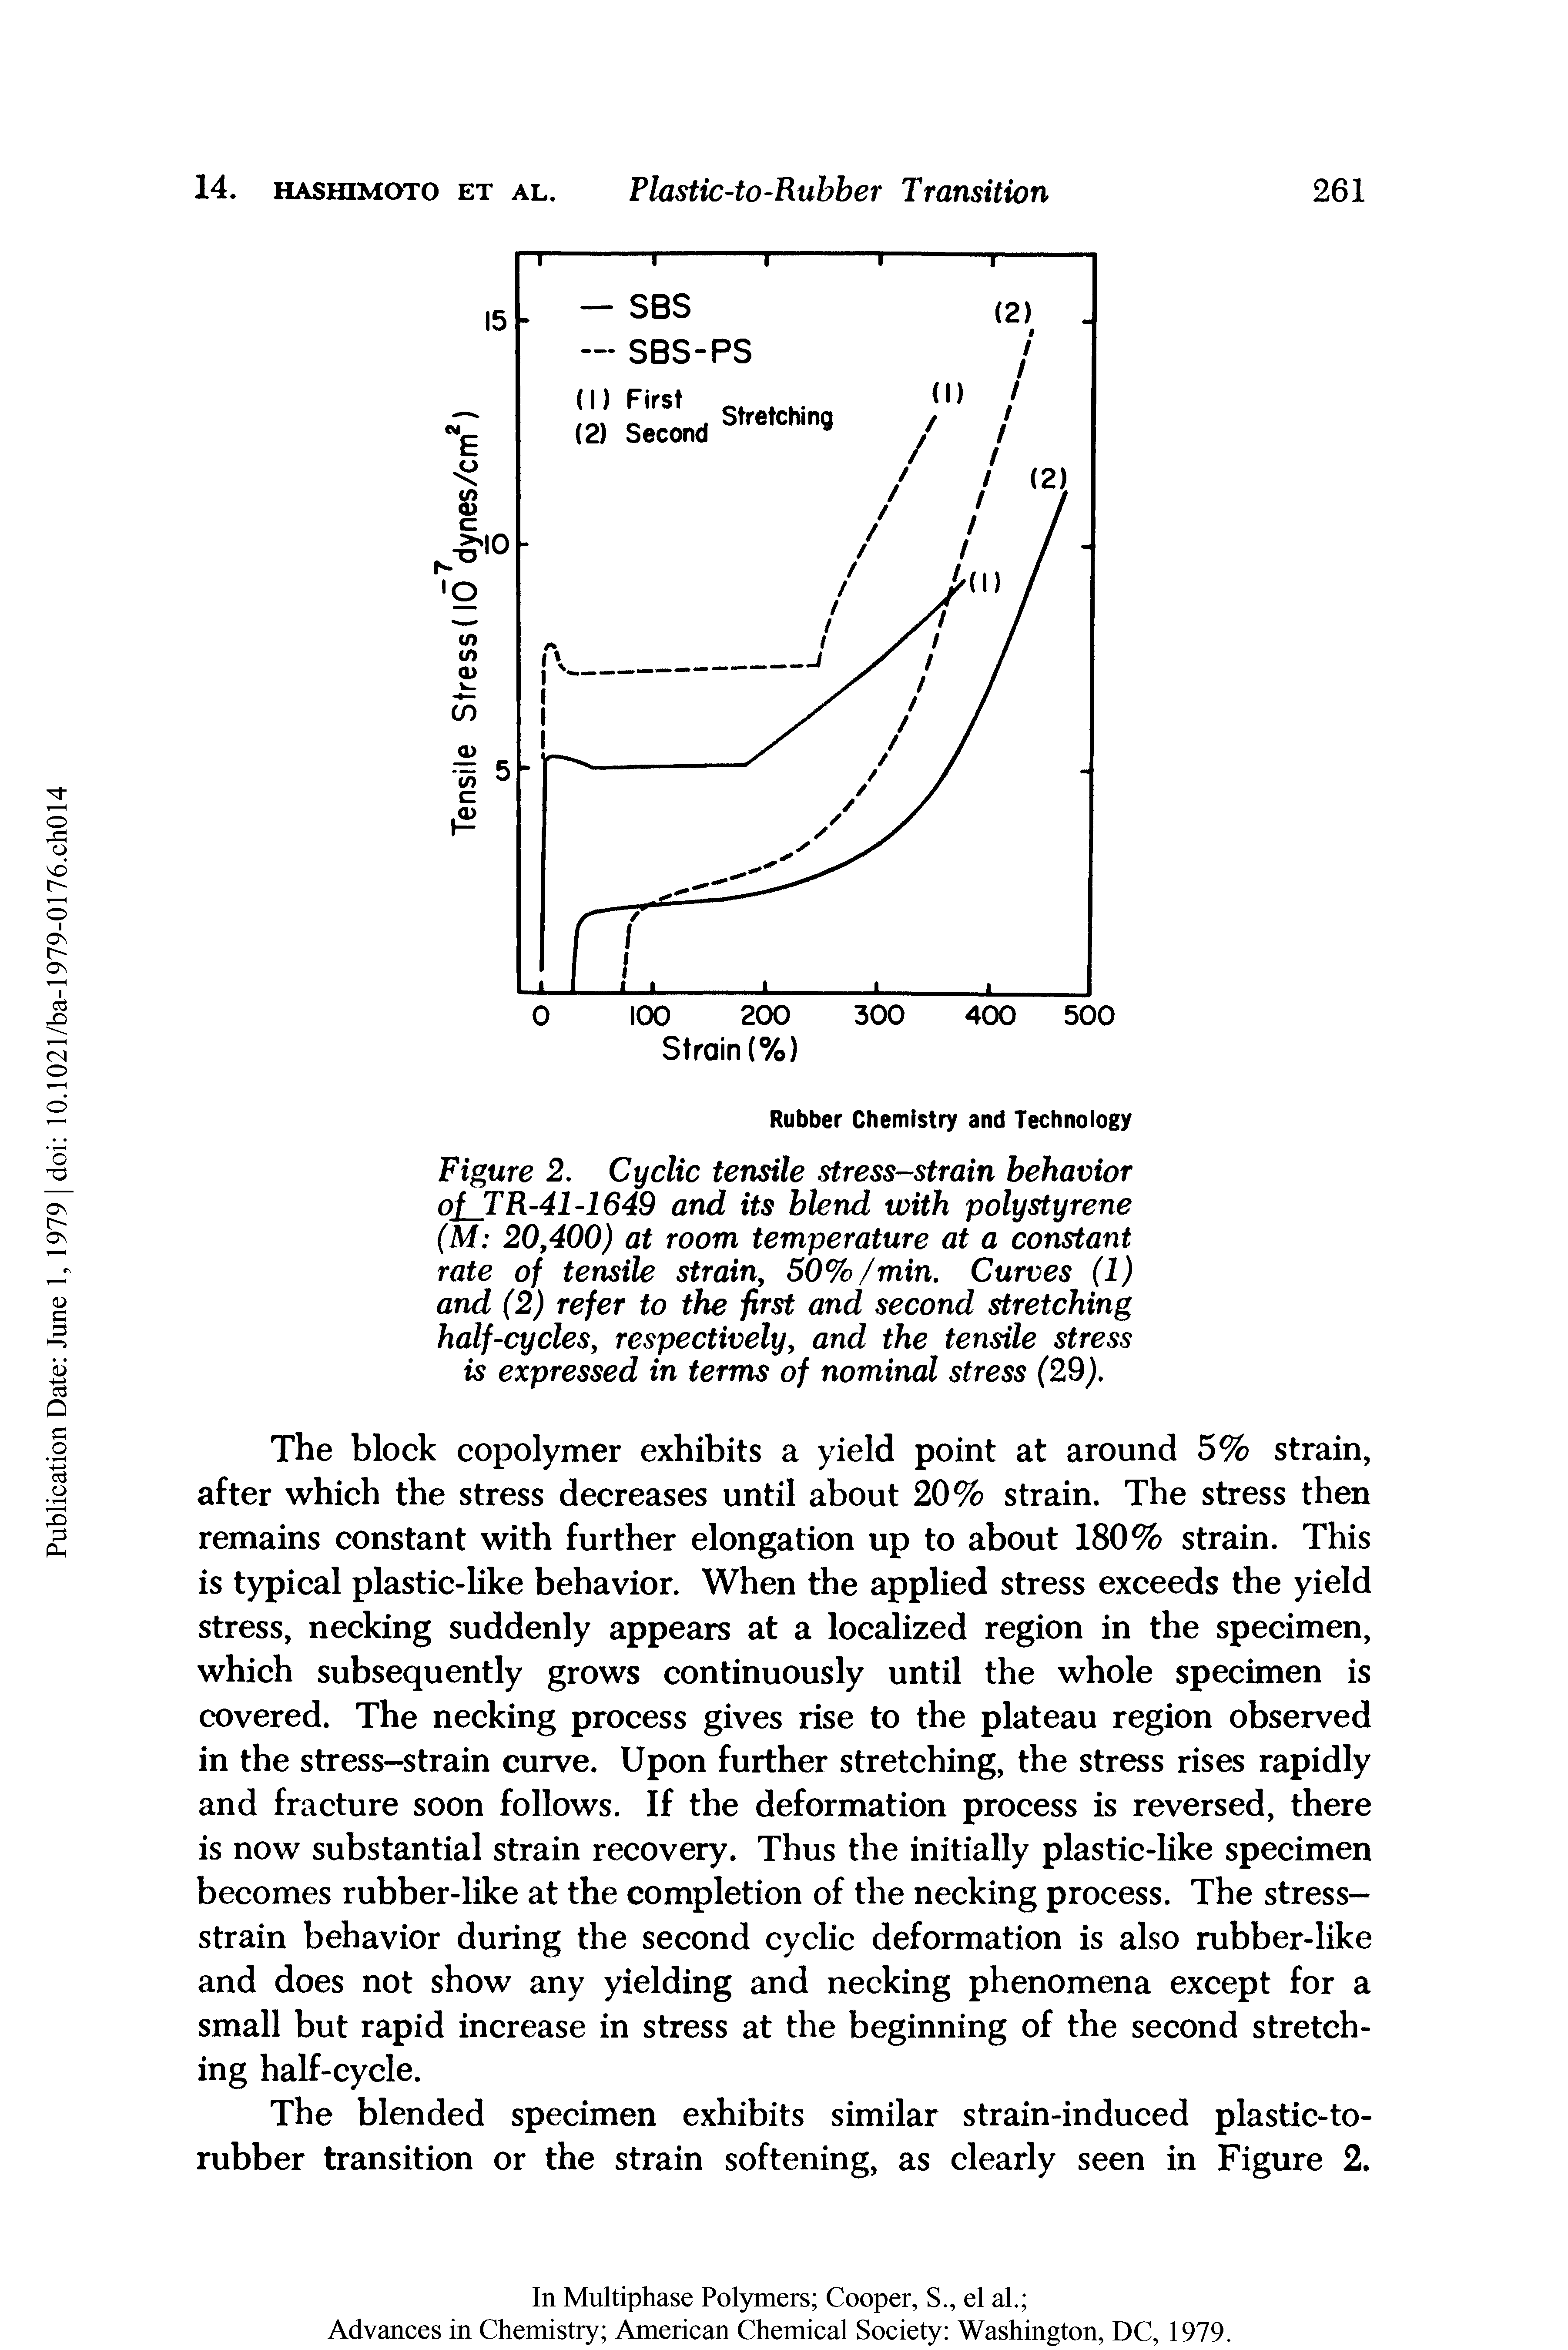 Figure 2. Cyclic tensile stress-strain behavior of TR-41-1649 and its blend with polystyrene (M 20,400) at room temperature at a constant rate of tensile strain, 50%/min. Curves (1) and (2) refer to the first and second stretching half-cycles, respectively, and the tensile stress is expressed in terms of nominal stress (29).